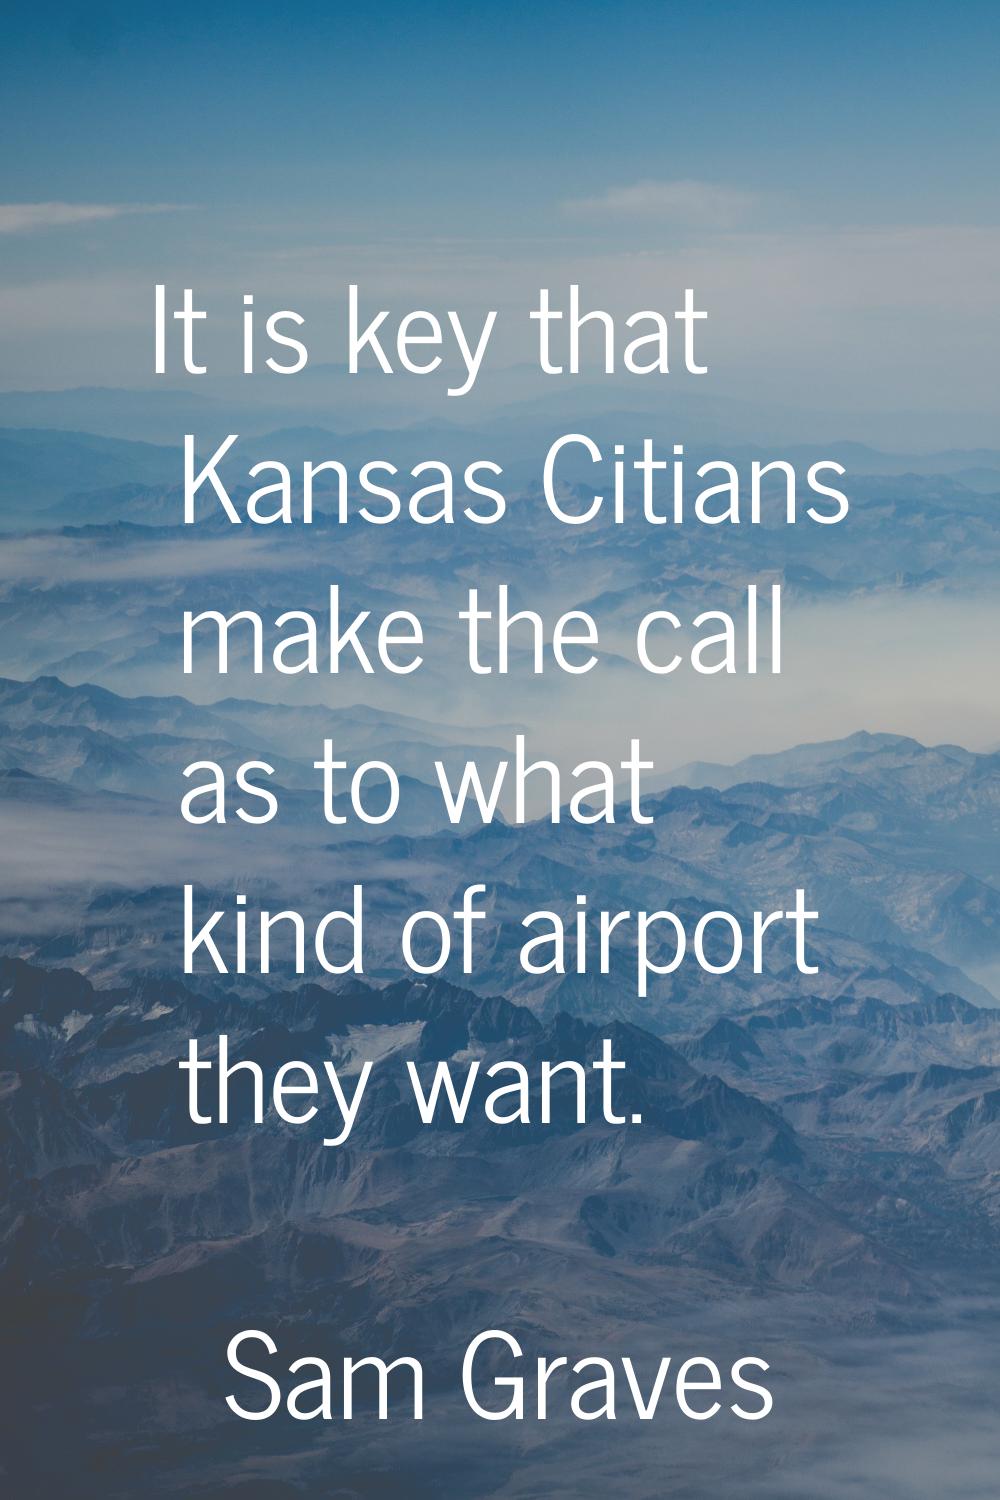 It is key that Kansas Citians make the call as to what kind of airport they want.